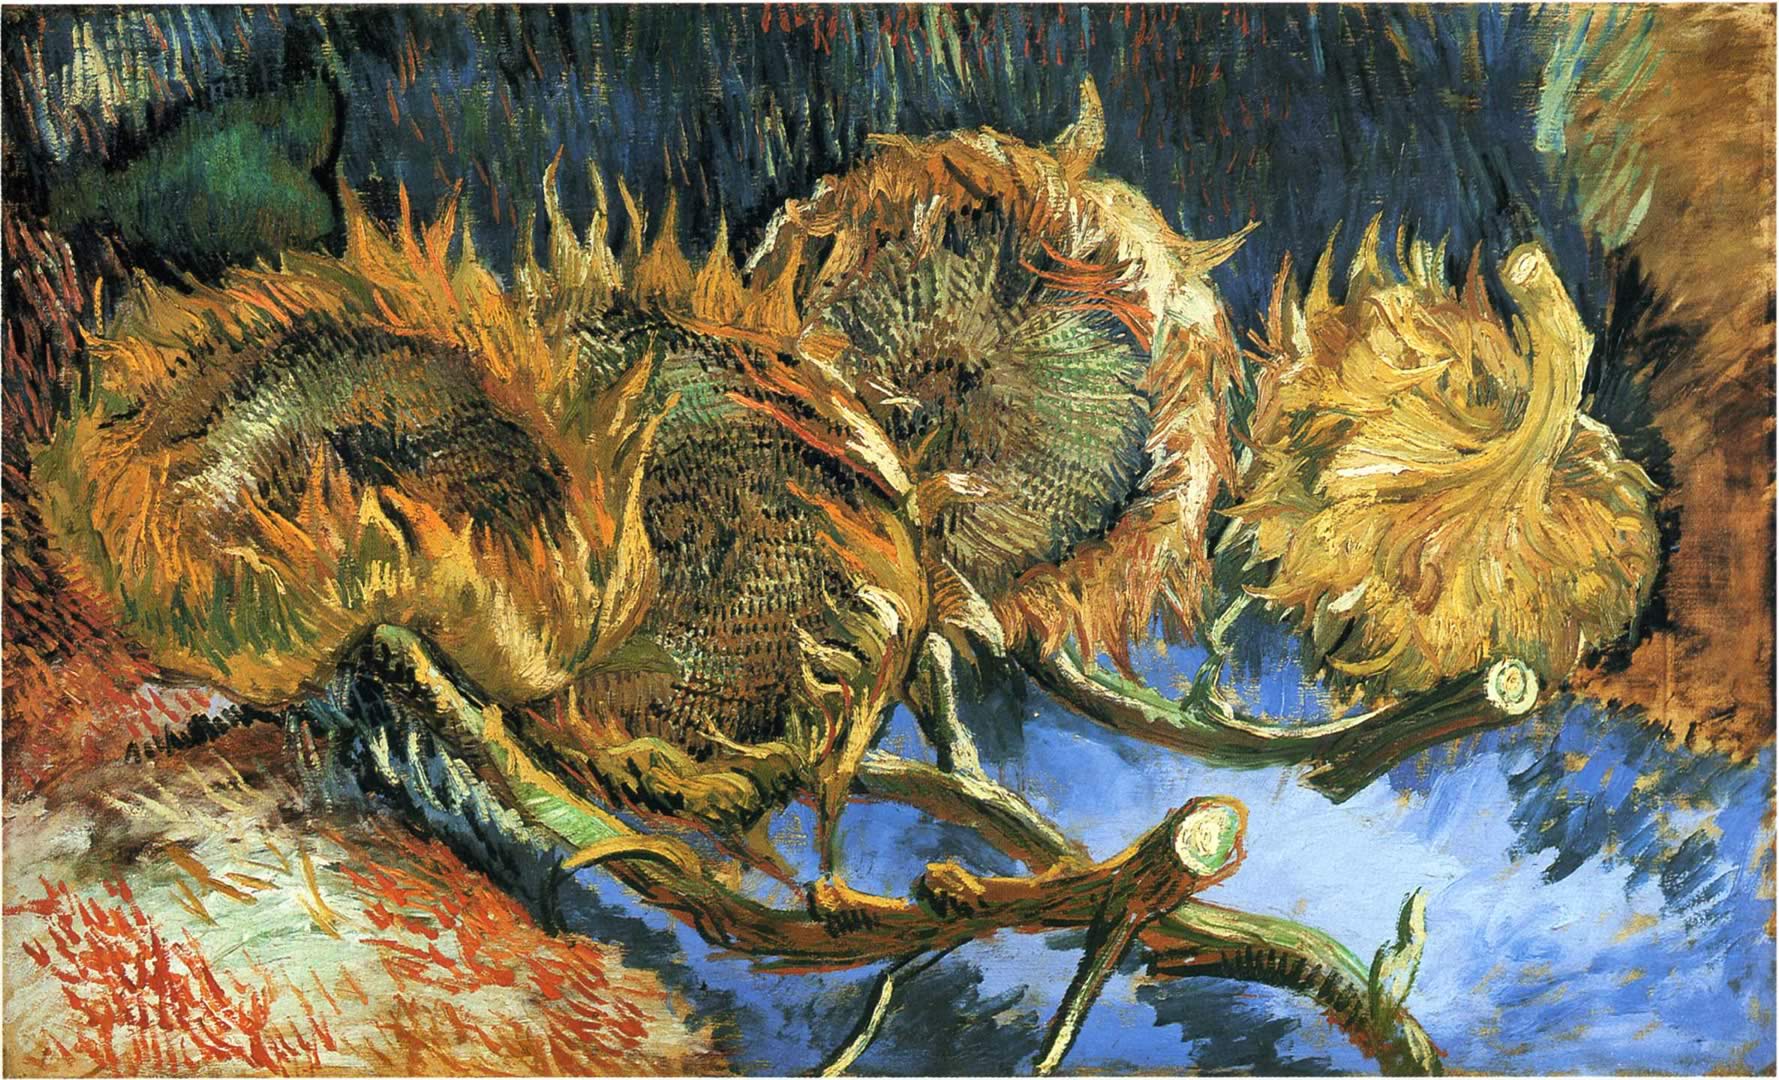 With Four Old Sunflowers Vincent Van Gogh Paintings Wallpaper Image